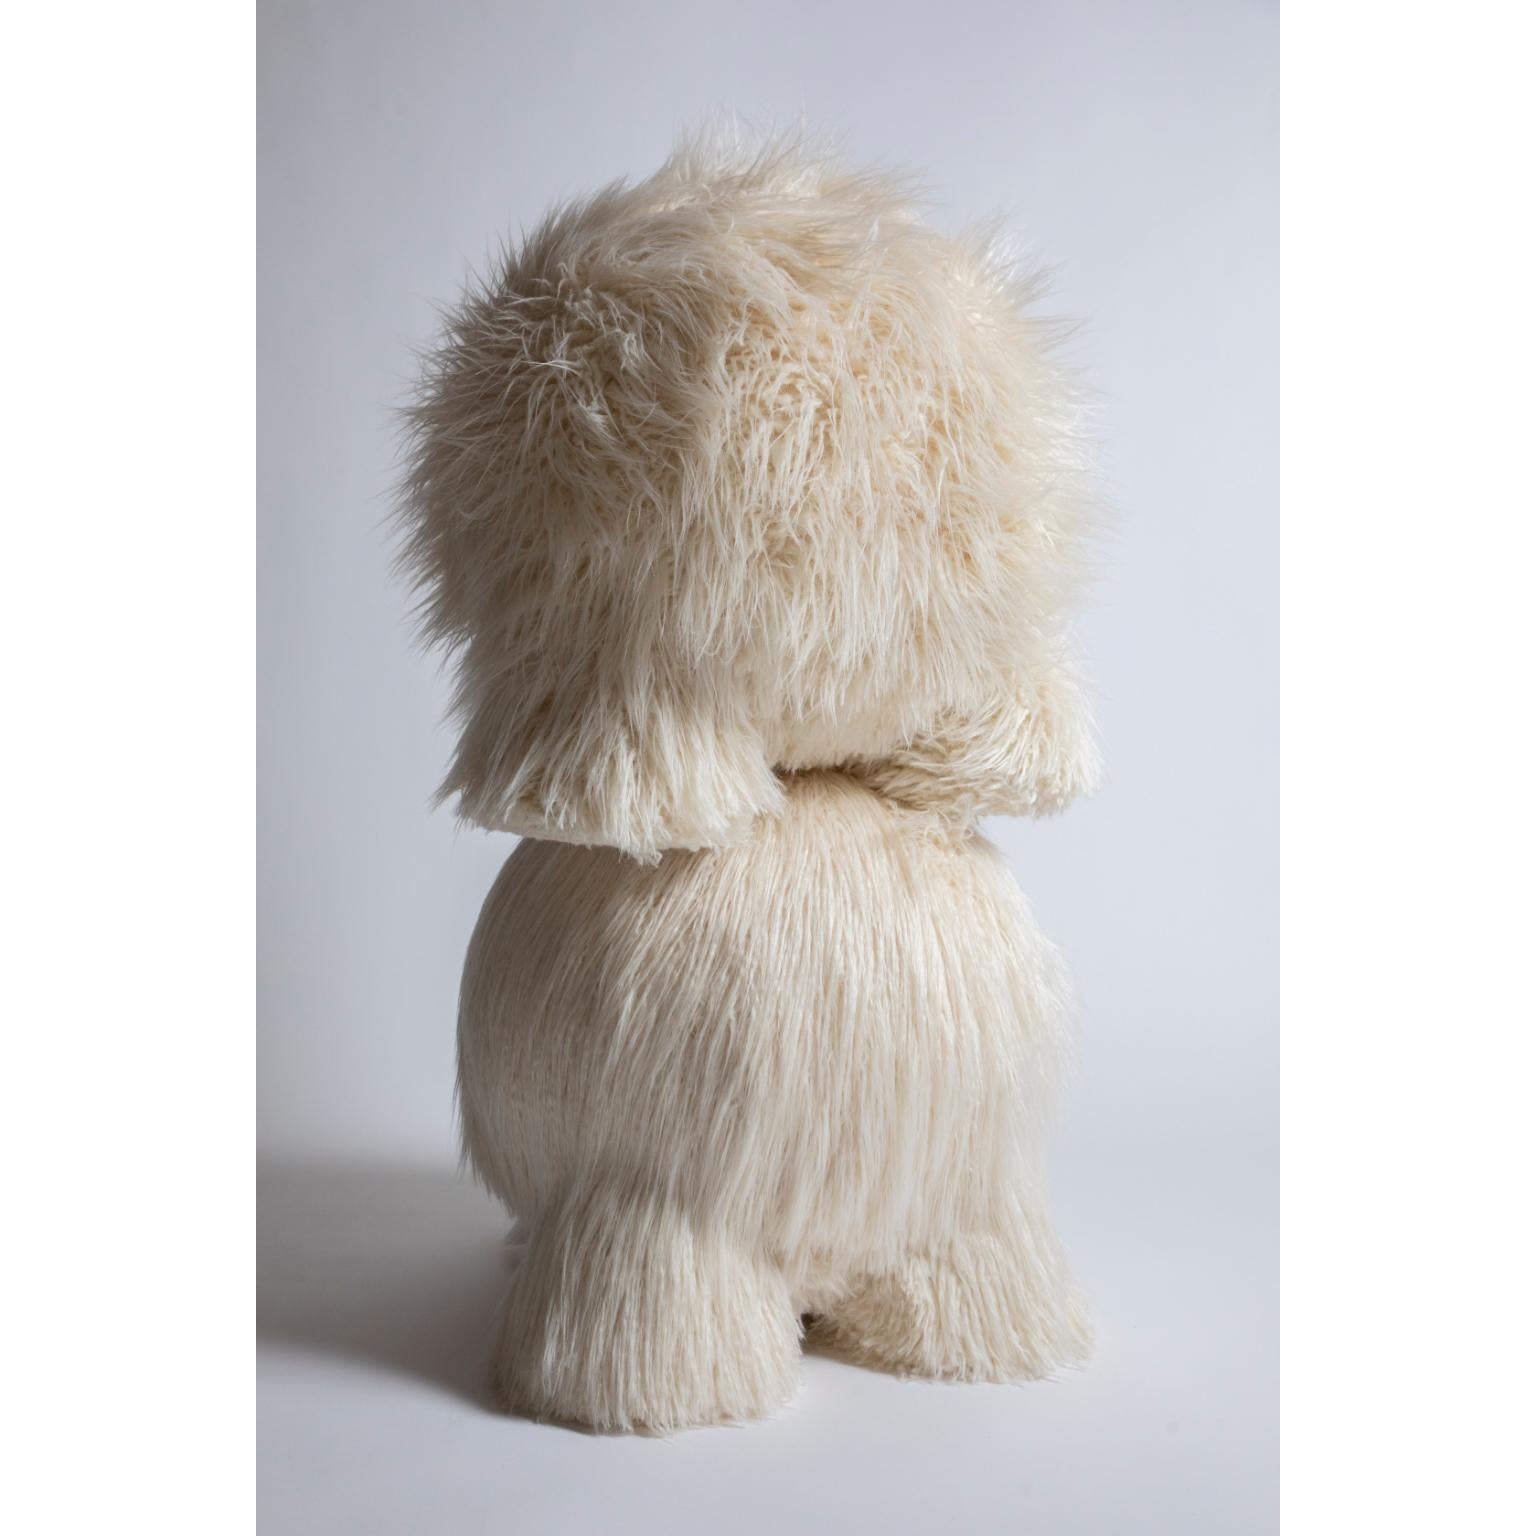 Fur Atlas stool by Pietro Franceschini
Sold exclusively by Galerie Philia
Manufacturer: Stefano Minotti
Dimensions: W 49 x H 52 cm
Materials: Fur
Available materials: Lamb/bouclé, gold leaf/cast brass

Pietro Franceschini is an architect and